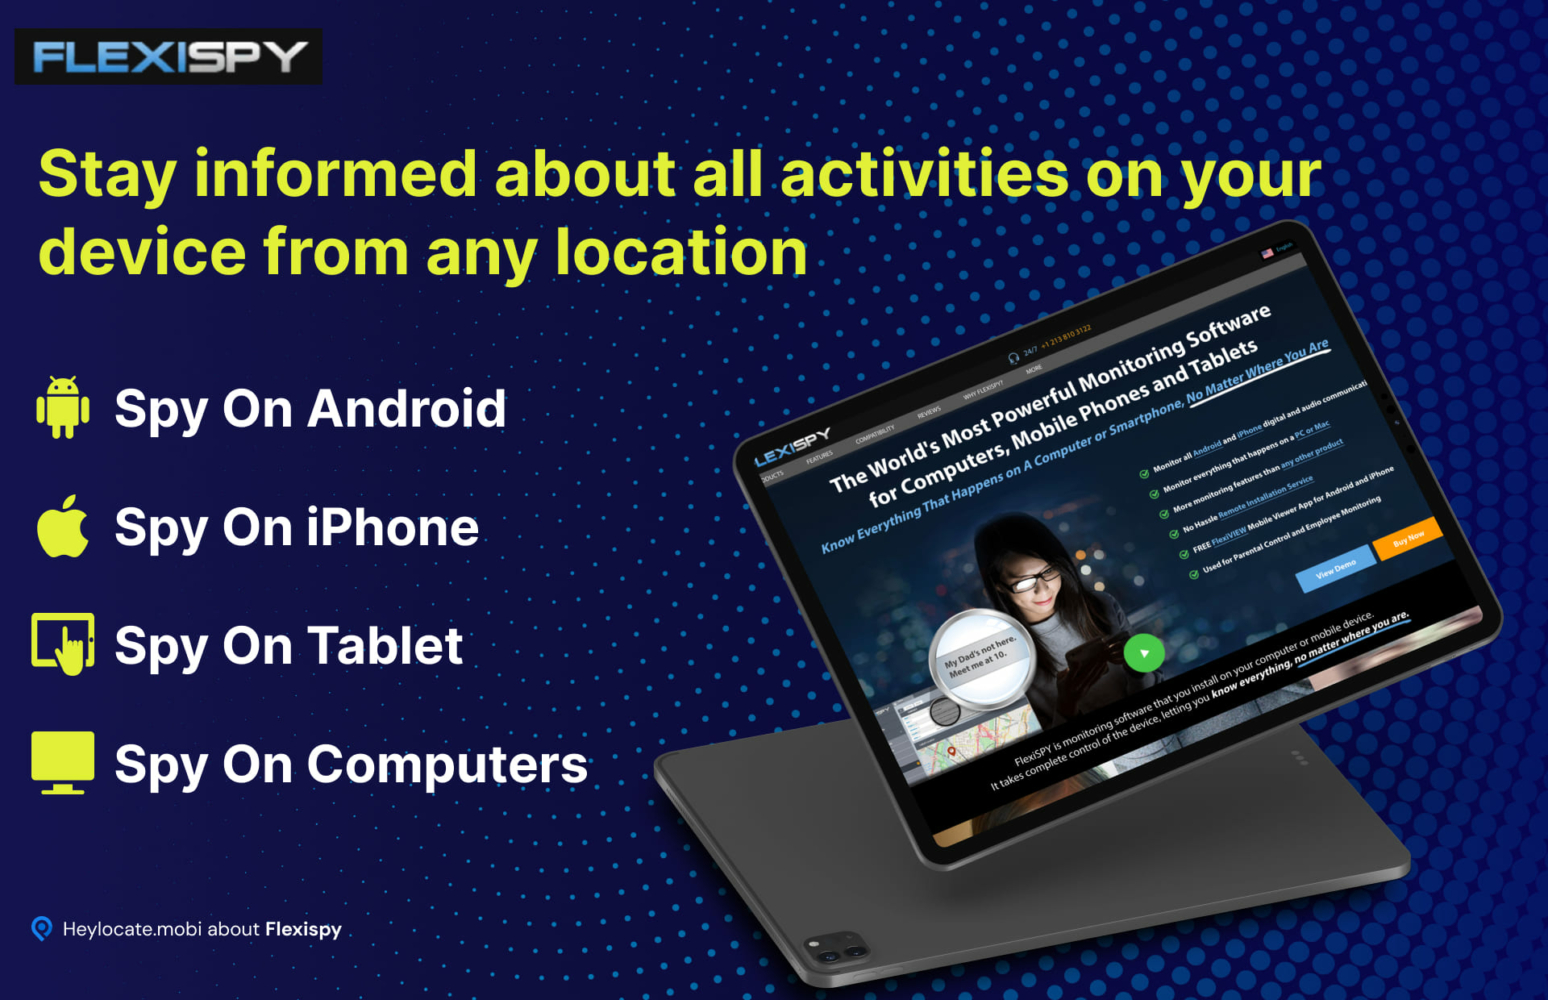 Promotional image of a gadget displaying FlexiSPY's website, a software for monitoring activities on various devices such as Android and iOS phones, tablets, and computers, with key features listed alongside.